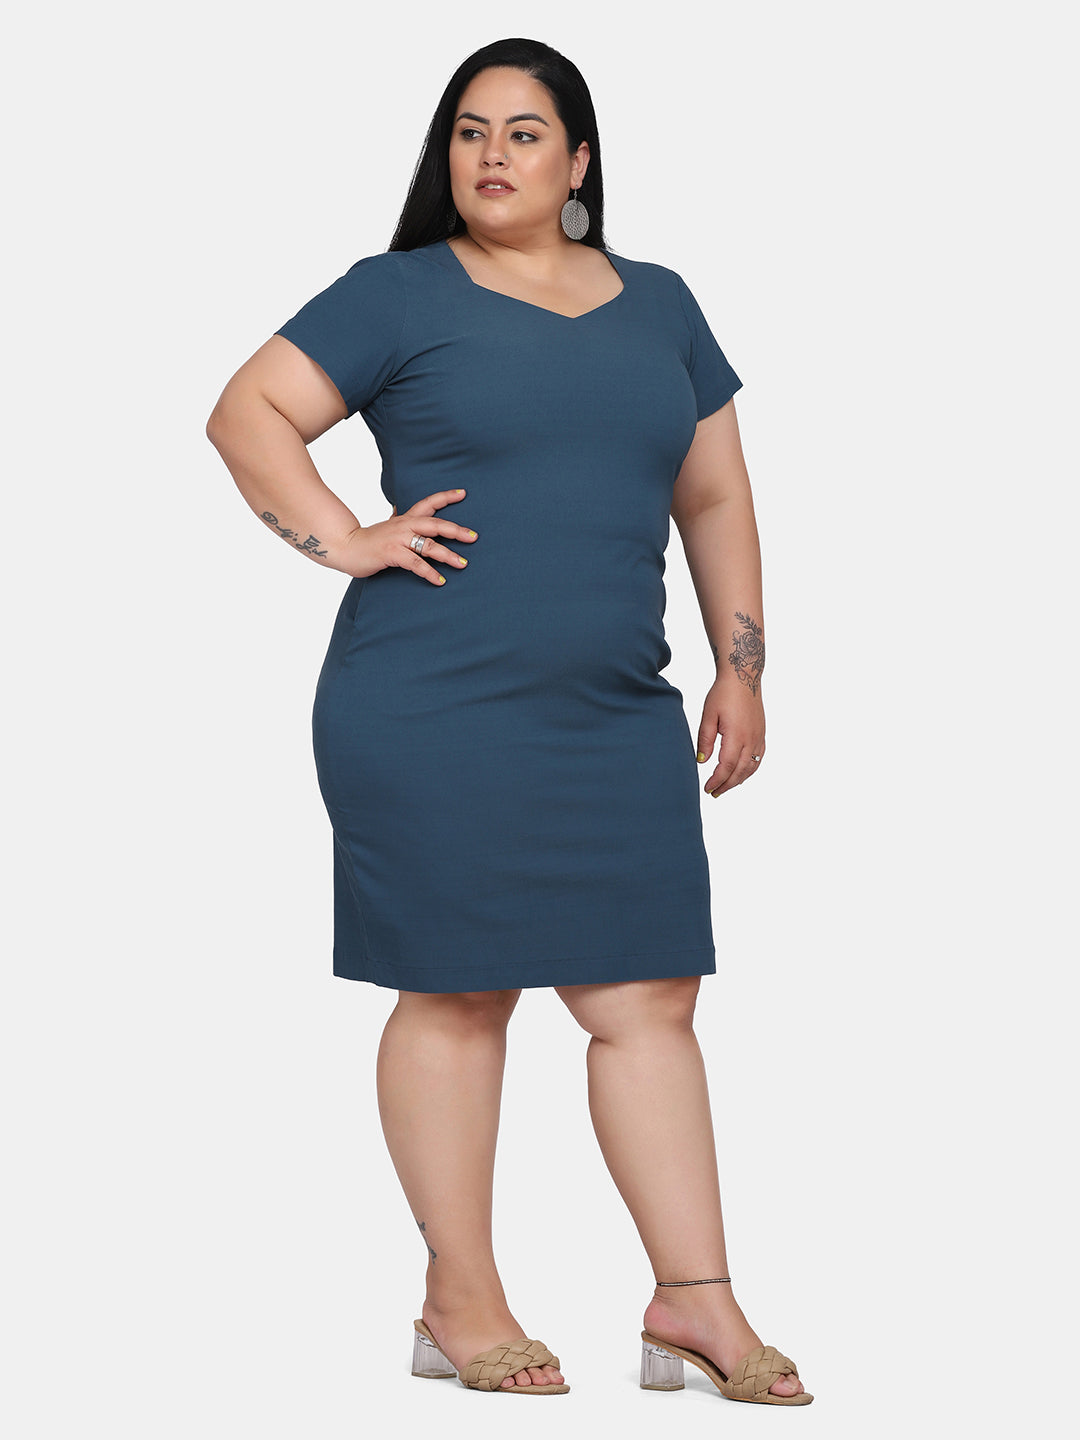 Solid Colour Stretch Dress For Women - Teal Blue